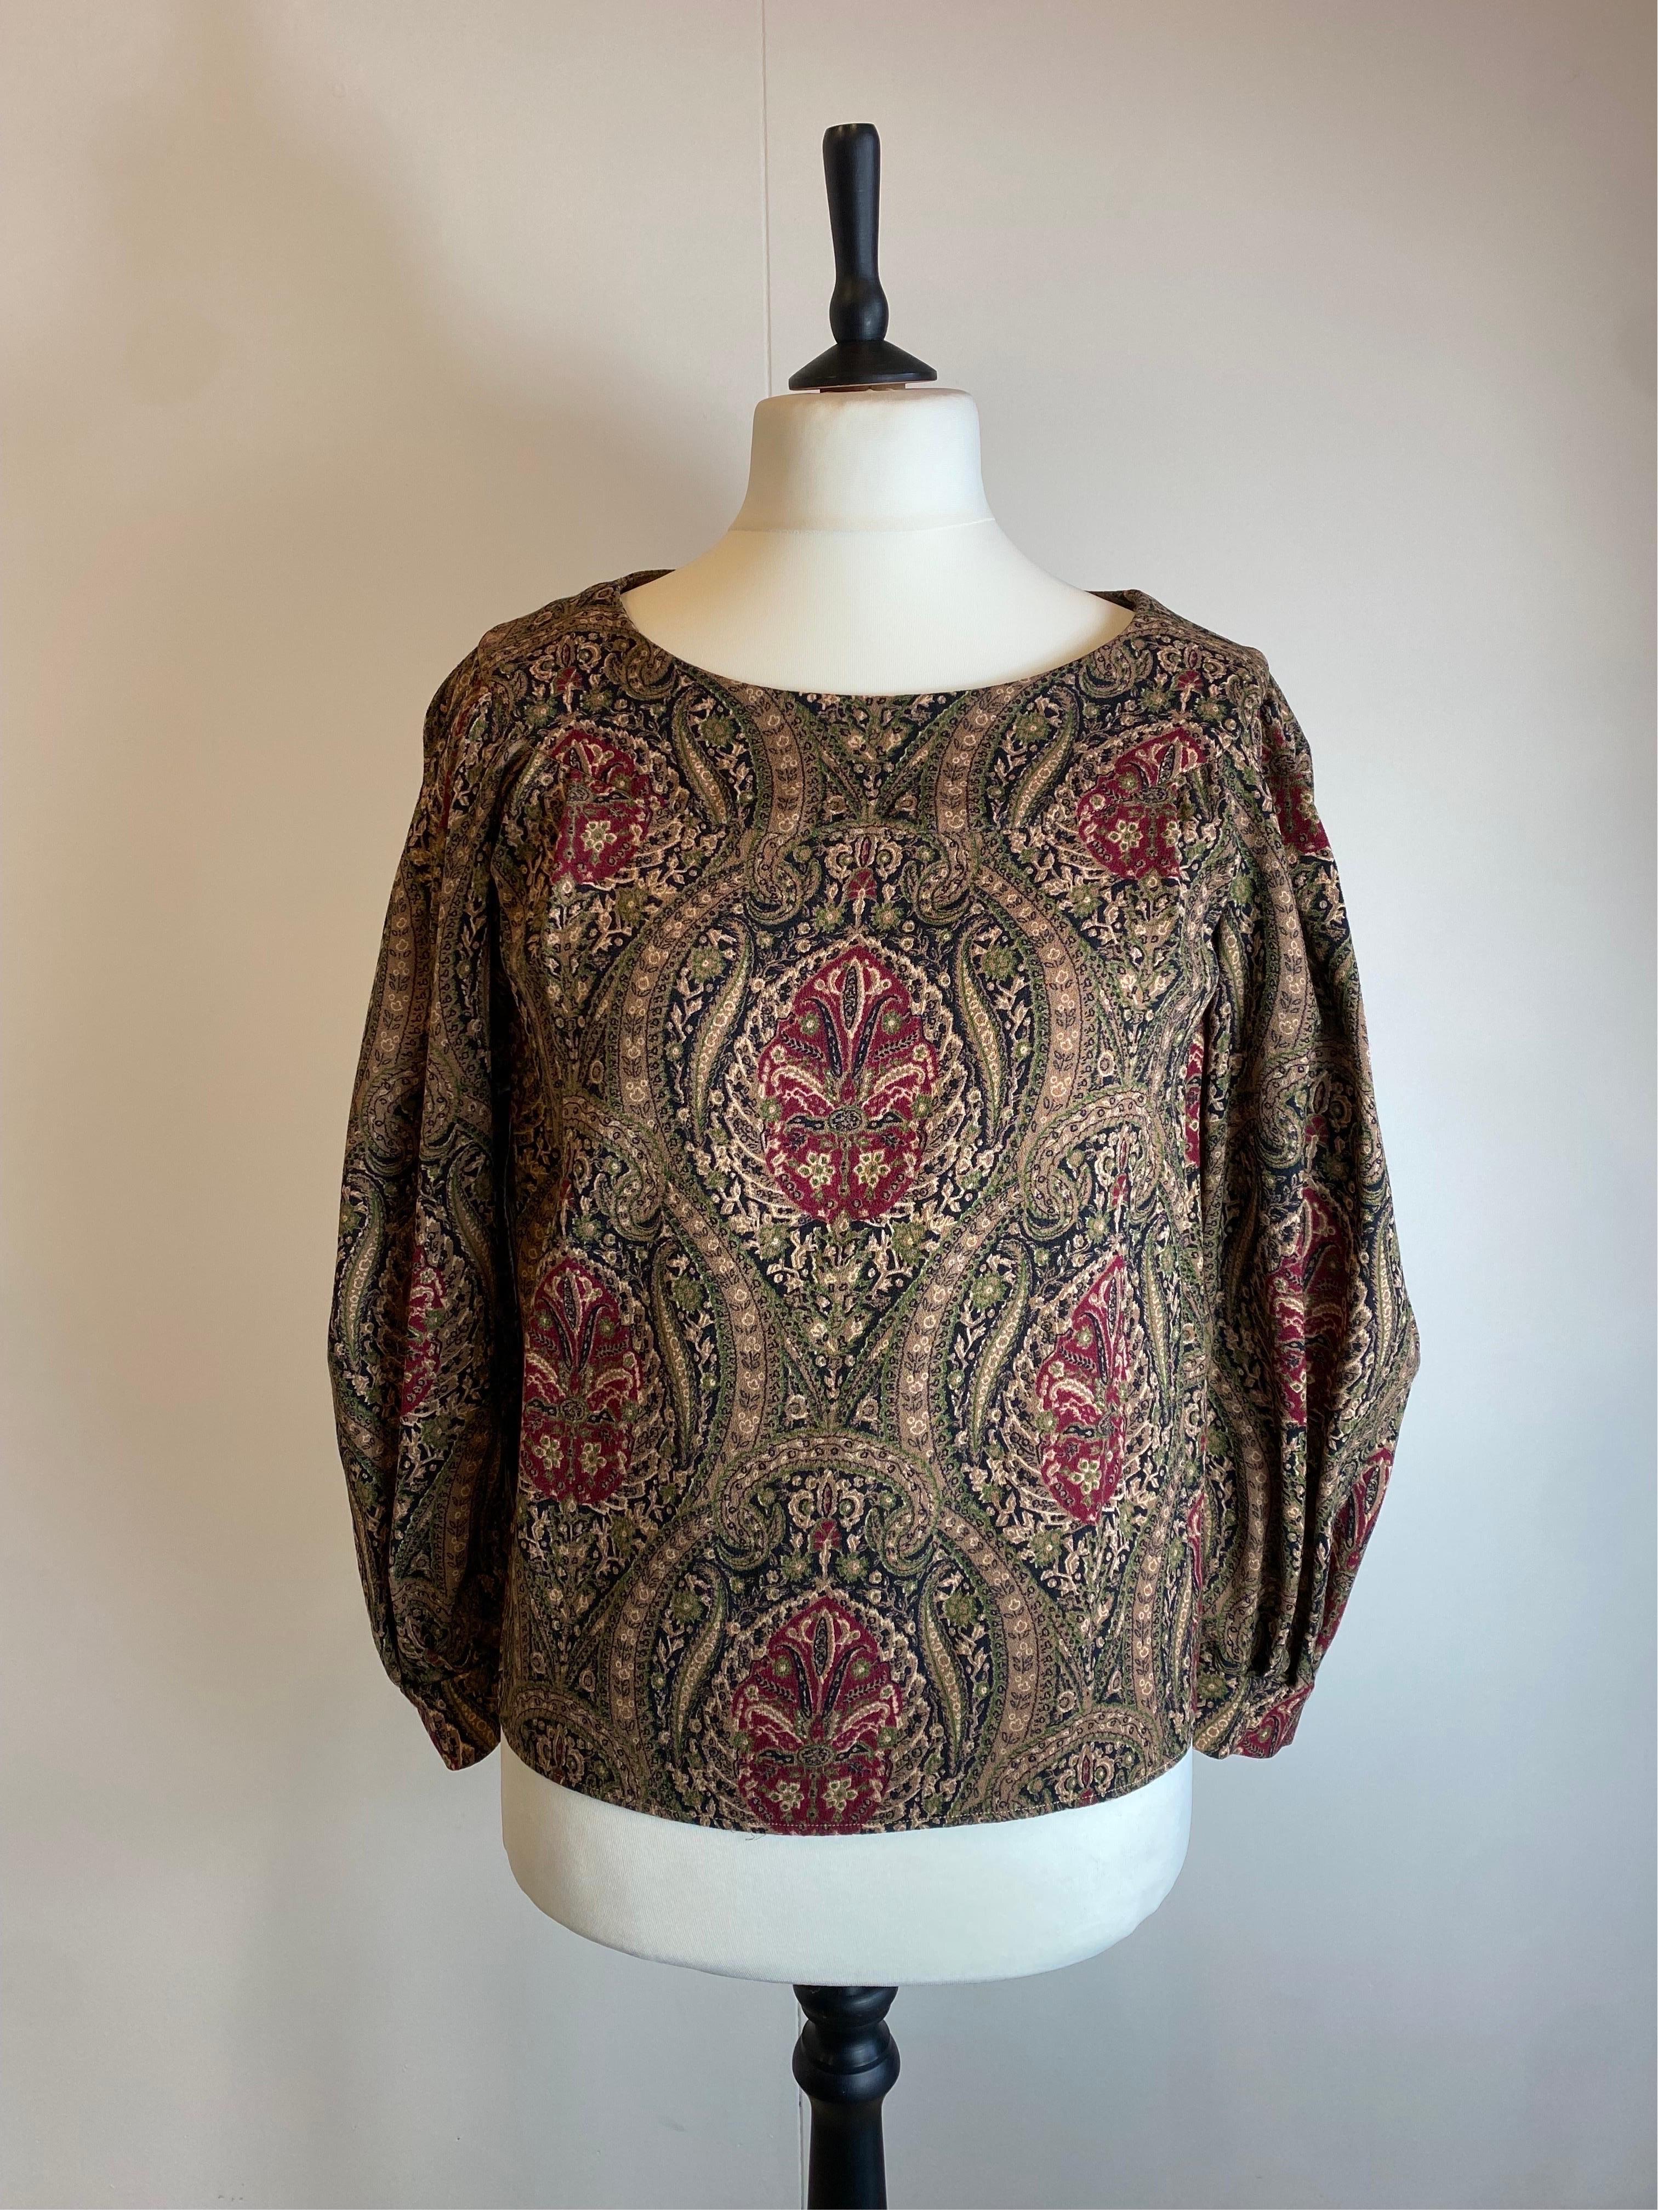 Yves Saint Laurent blouse.
Vintage item. 80s.
Floral damask paisley print
composition label missing. 
We think it's a wool blend.
Size 36 French
Shoulders 42 cm
Bust 42 cm
Length 58 cm
Sleeve 58 cm
Excellent general condition, with minimal signs of